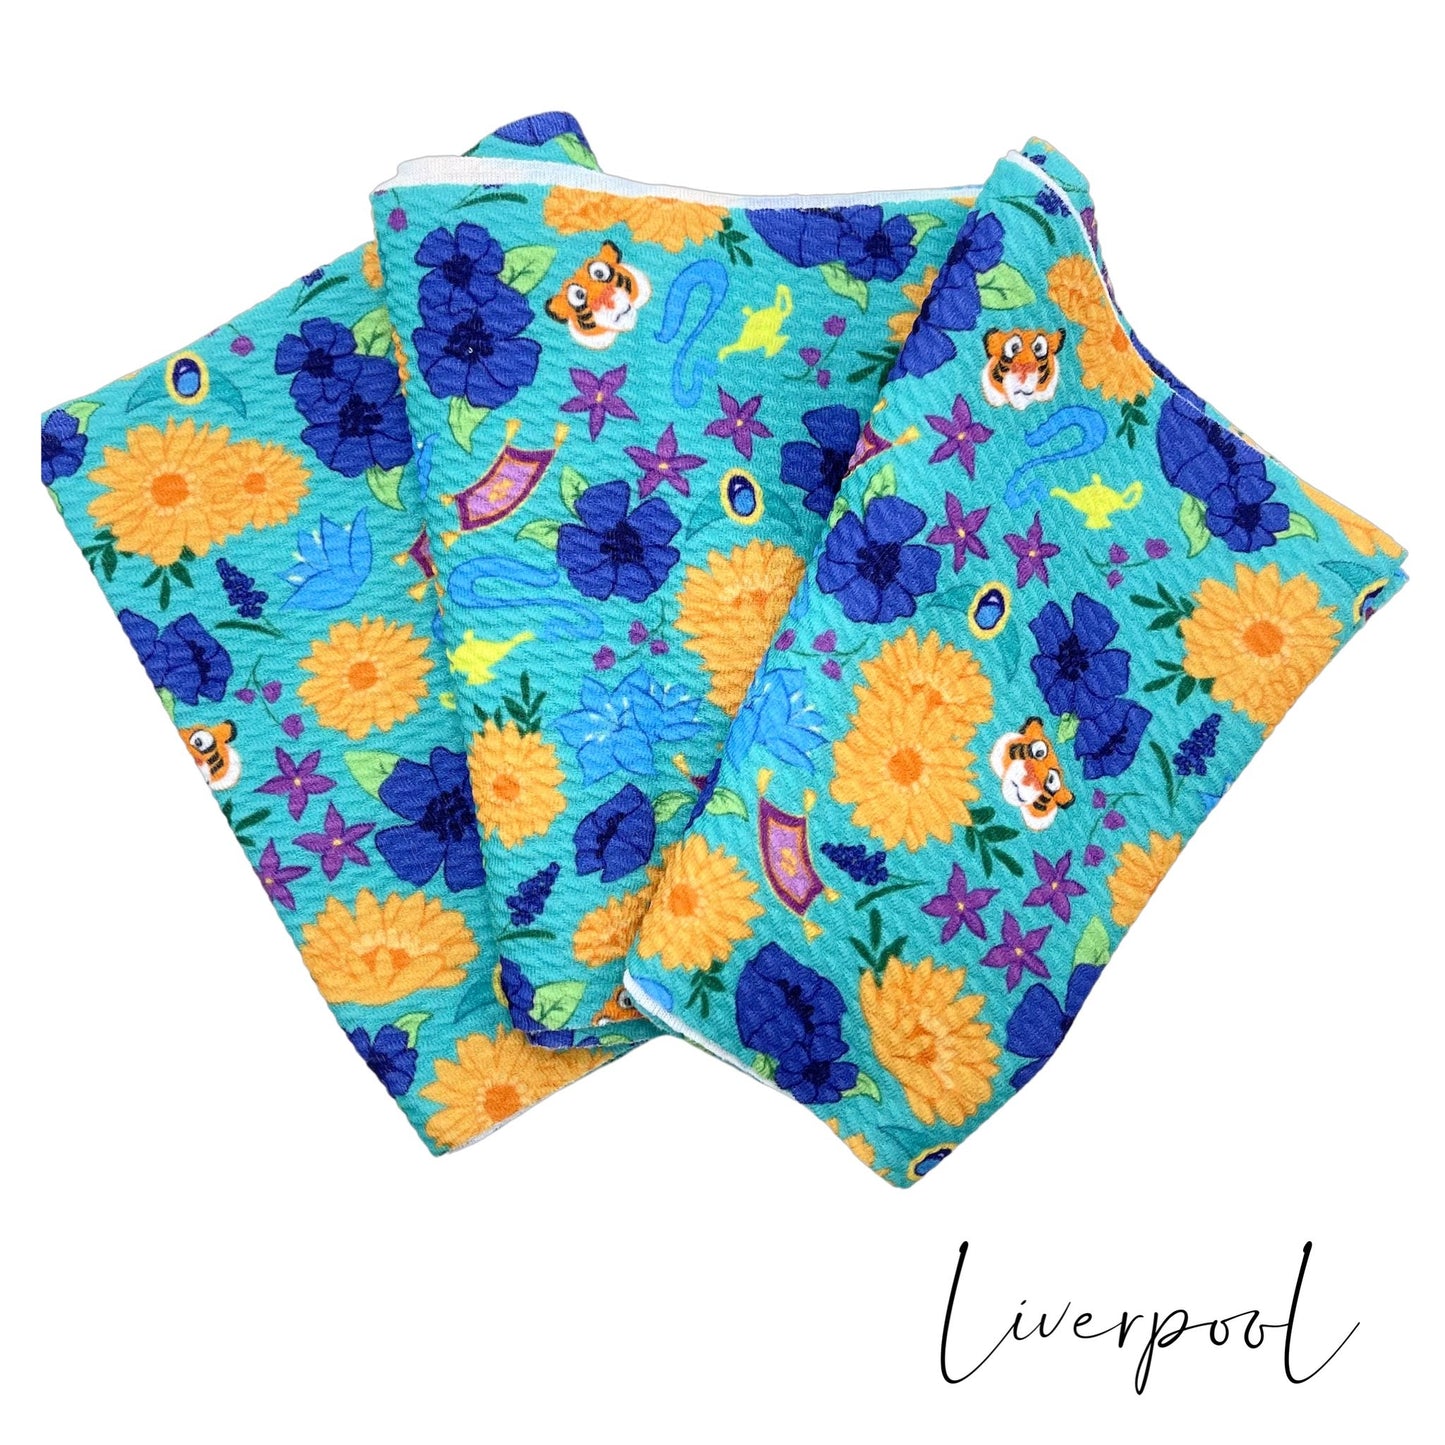 Folded aqua Liverpool stretch fabric strip with royal, golden yellow, and purple floral princess pattern including flying carpets, tiger face, and magic lamps.